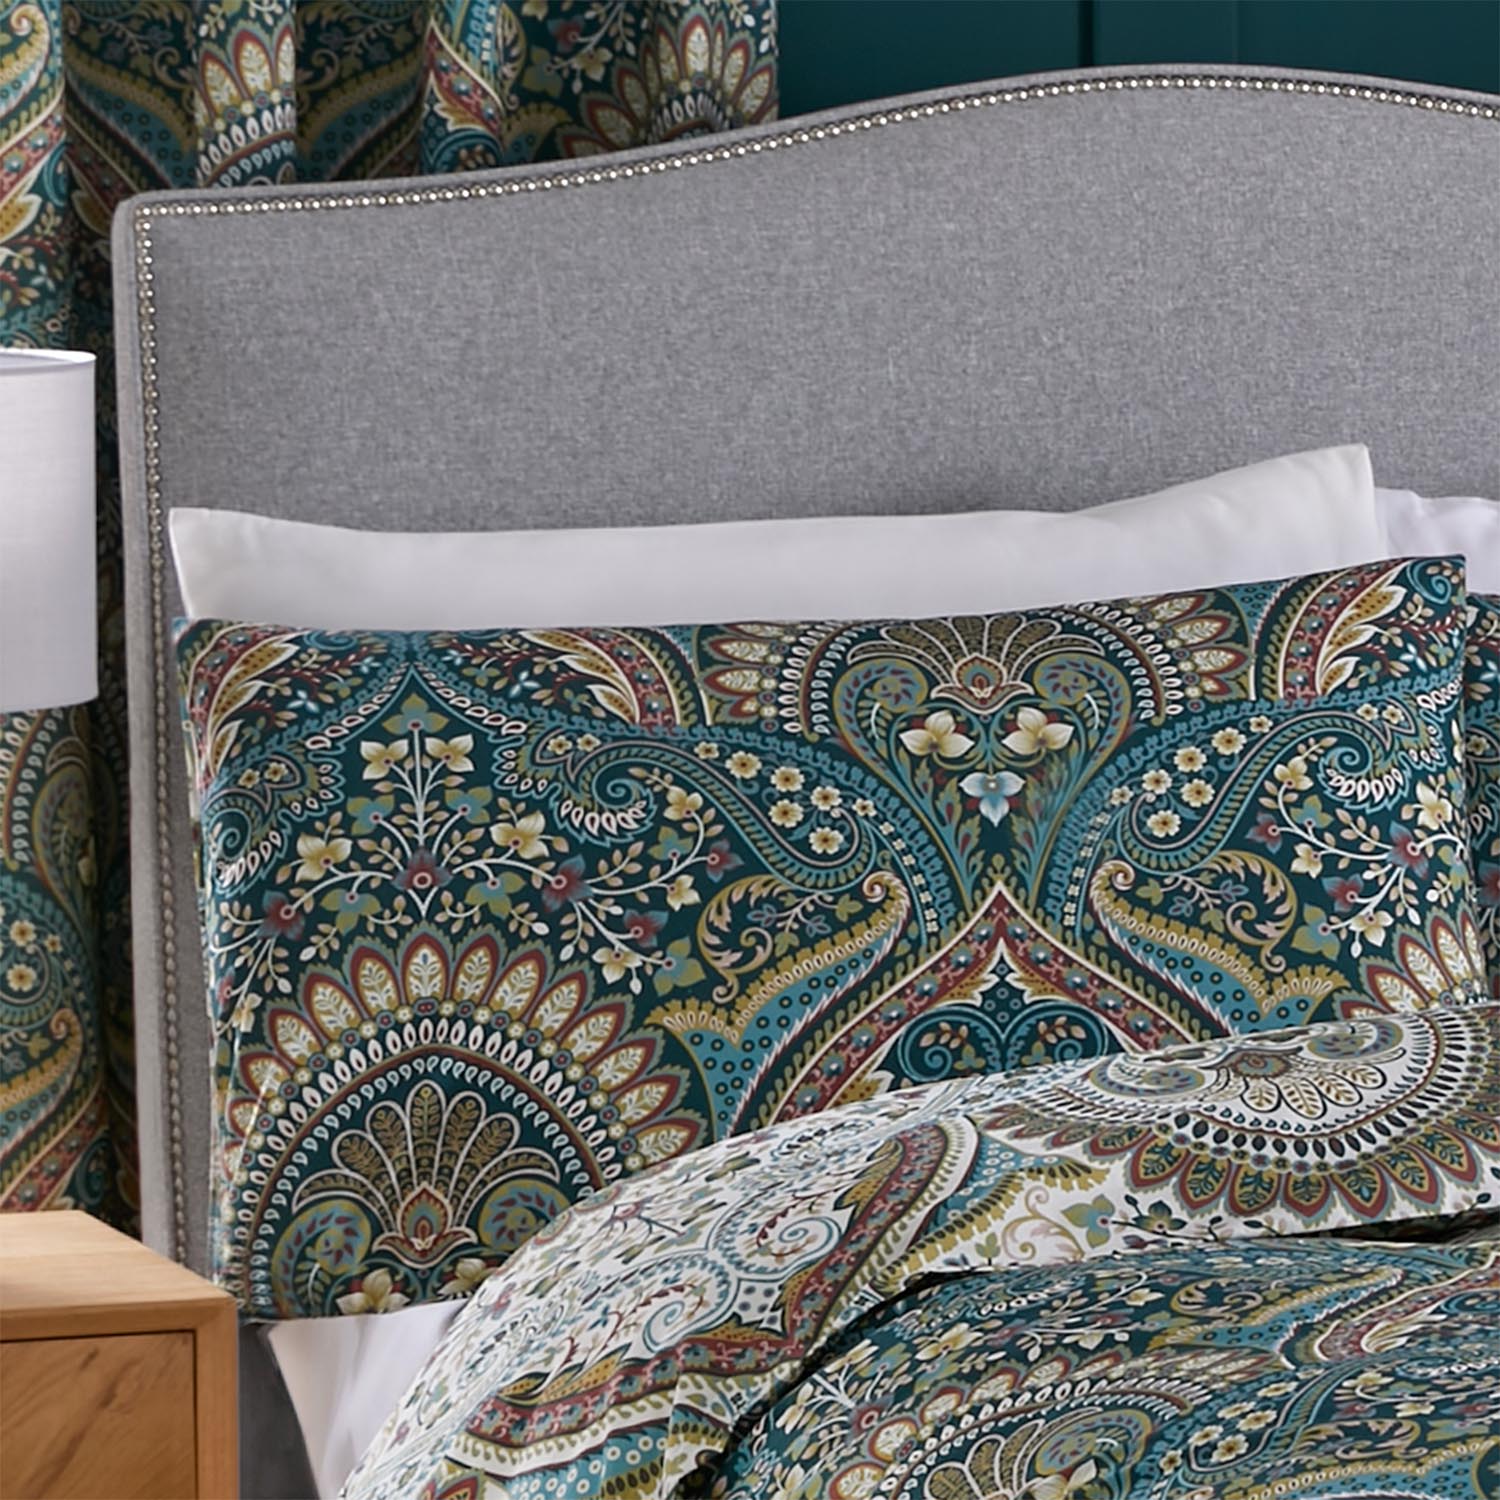 The Home Collection Palace Paisley Duvet Cover Set - Teal 4 Shaws Department Stores